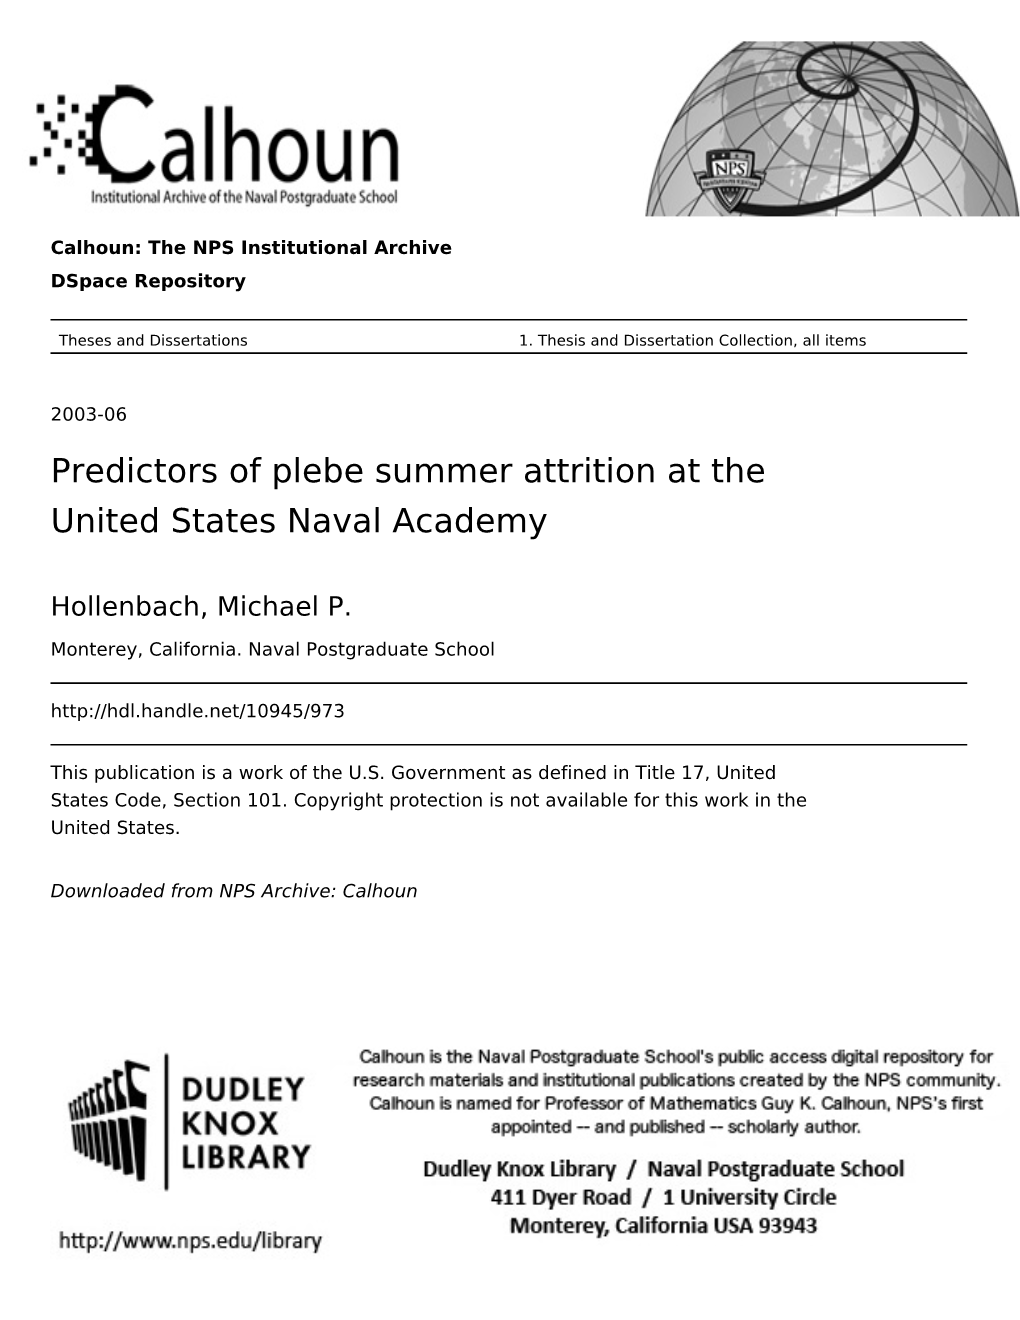 Predictors of Plebe Summer Attrition at the United States Naval Academy